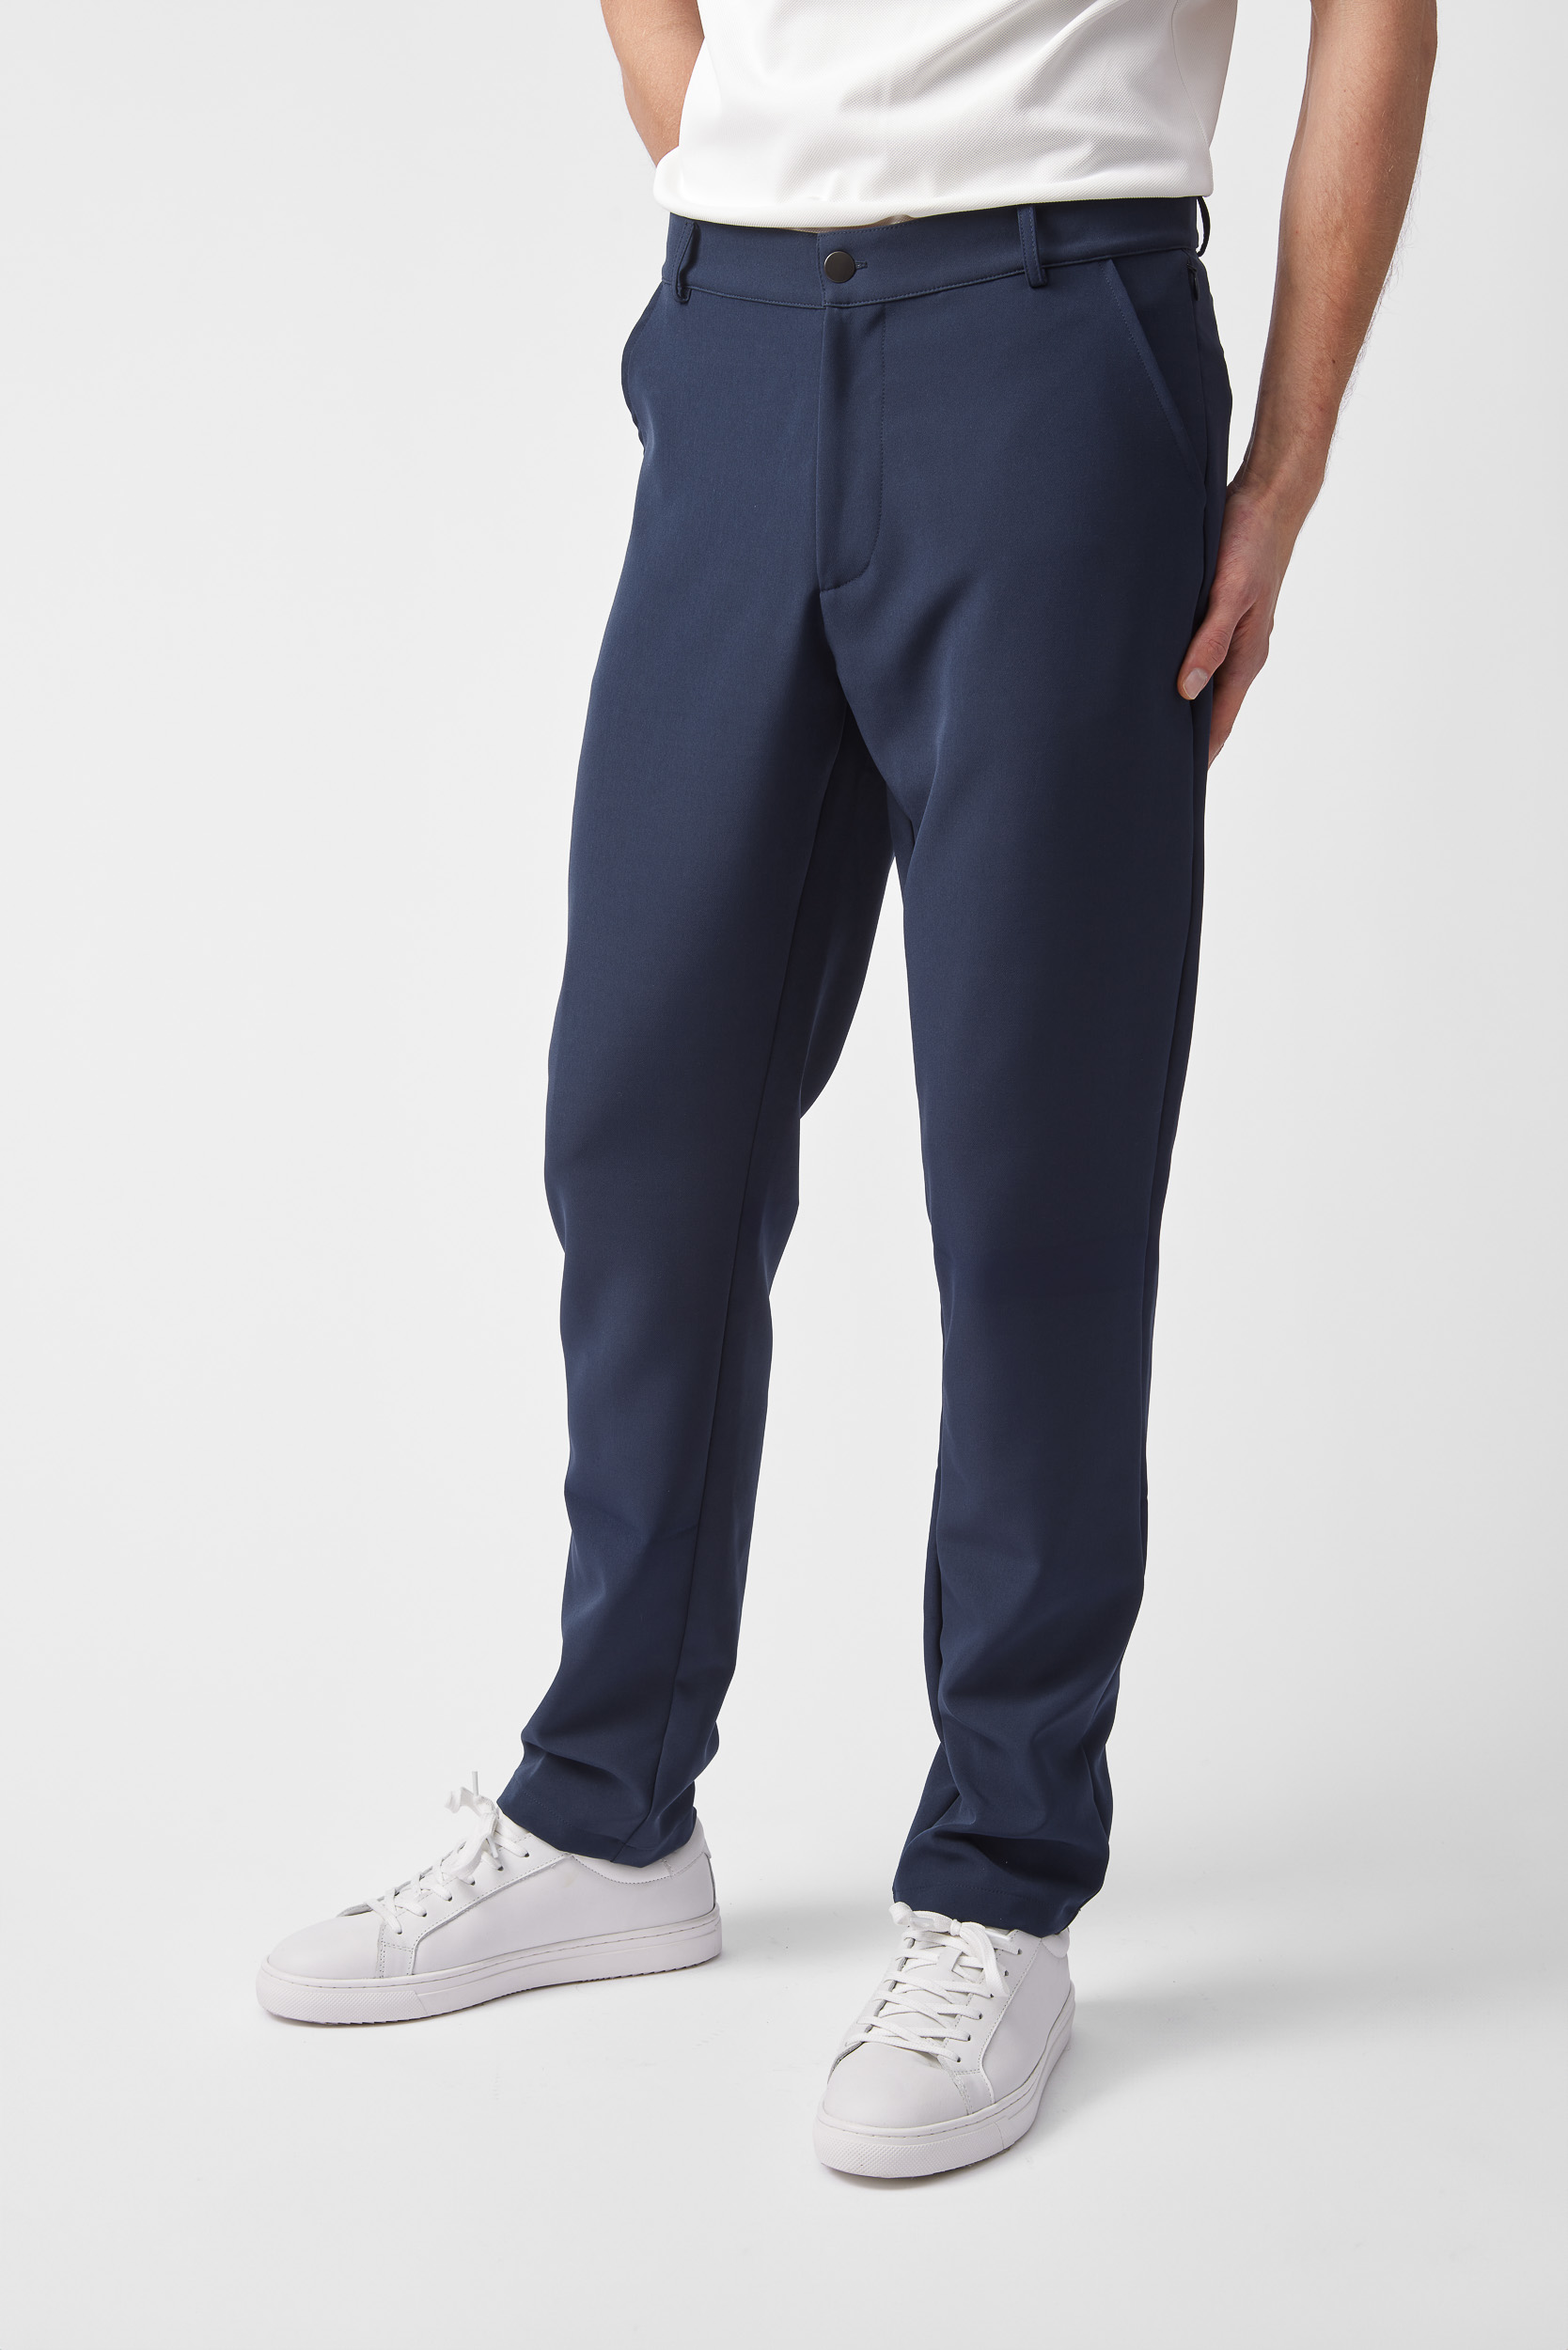 men's navy trousers and fresh white trainers